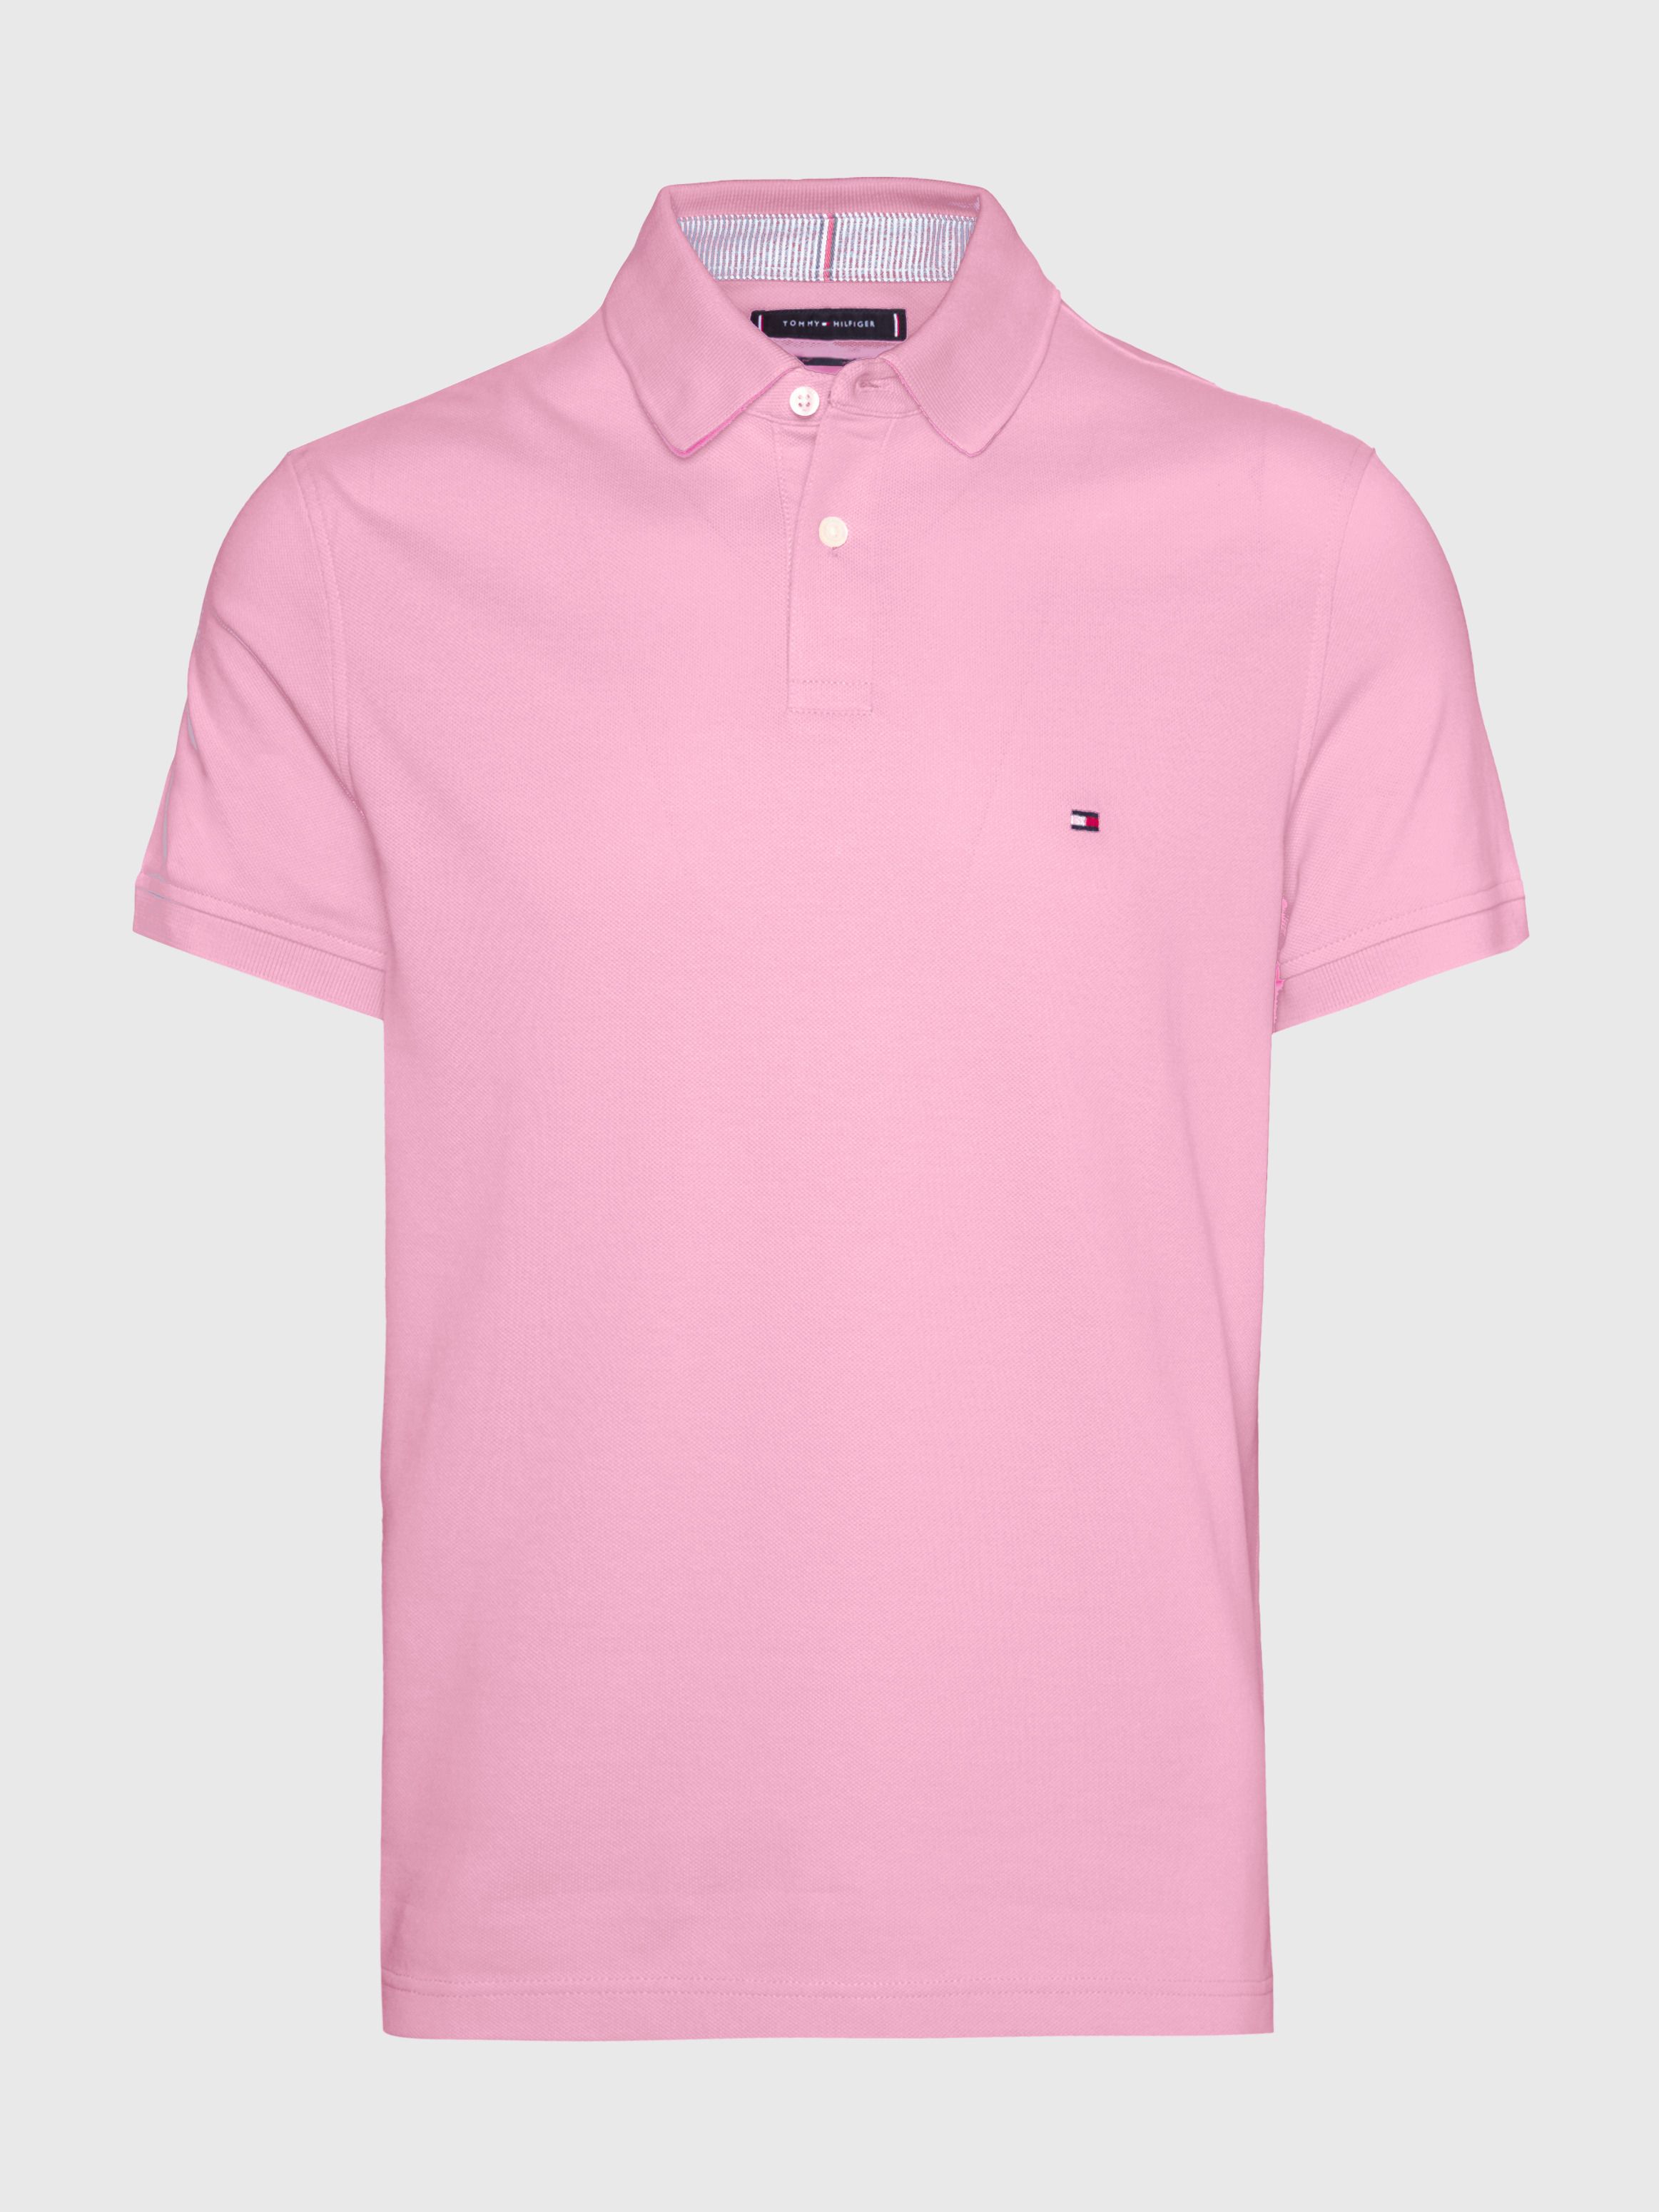 1985 Collection Pique Polo | Tommy Hilfiger